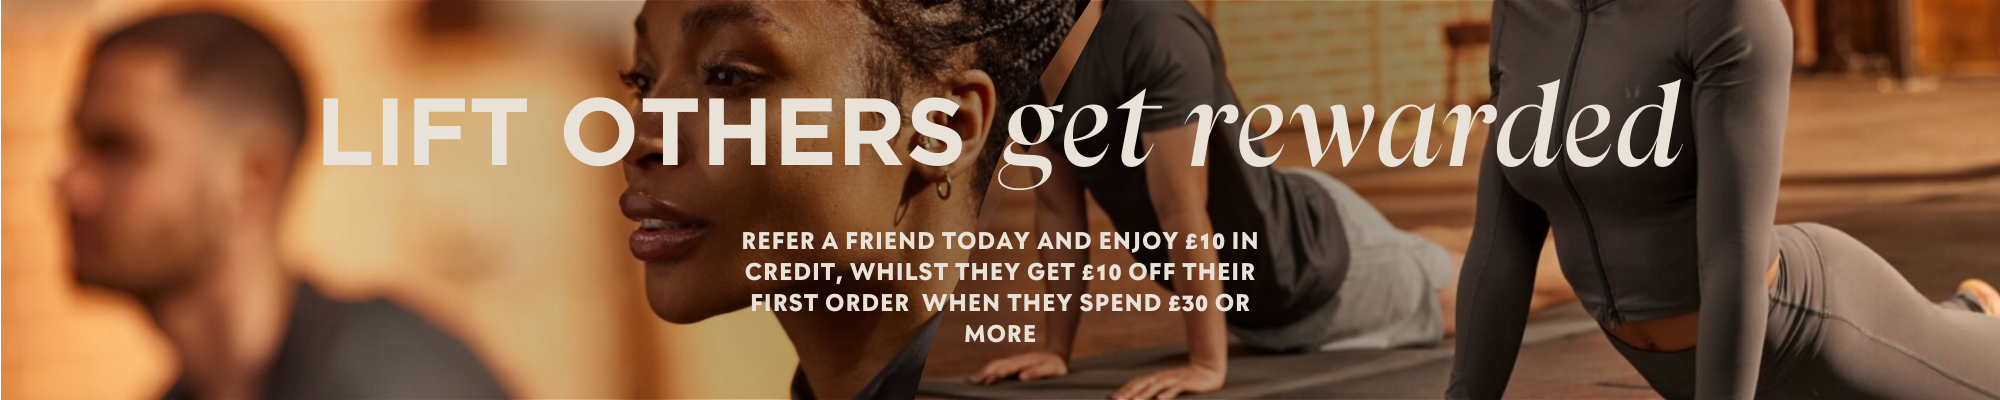 Refer a friend and both get £10 when they spend £30+